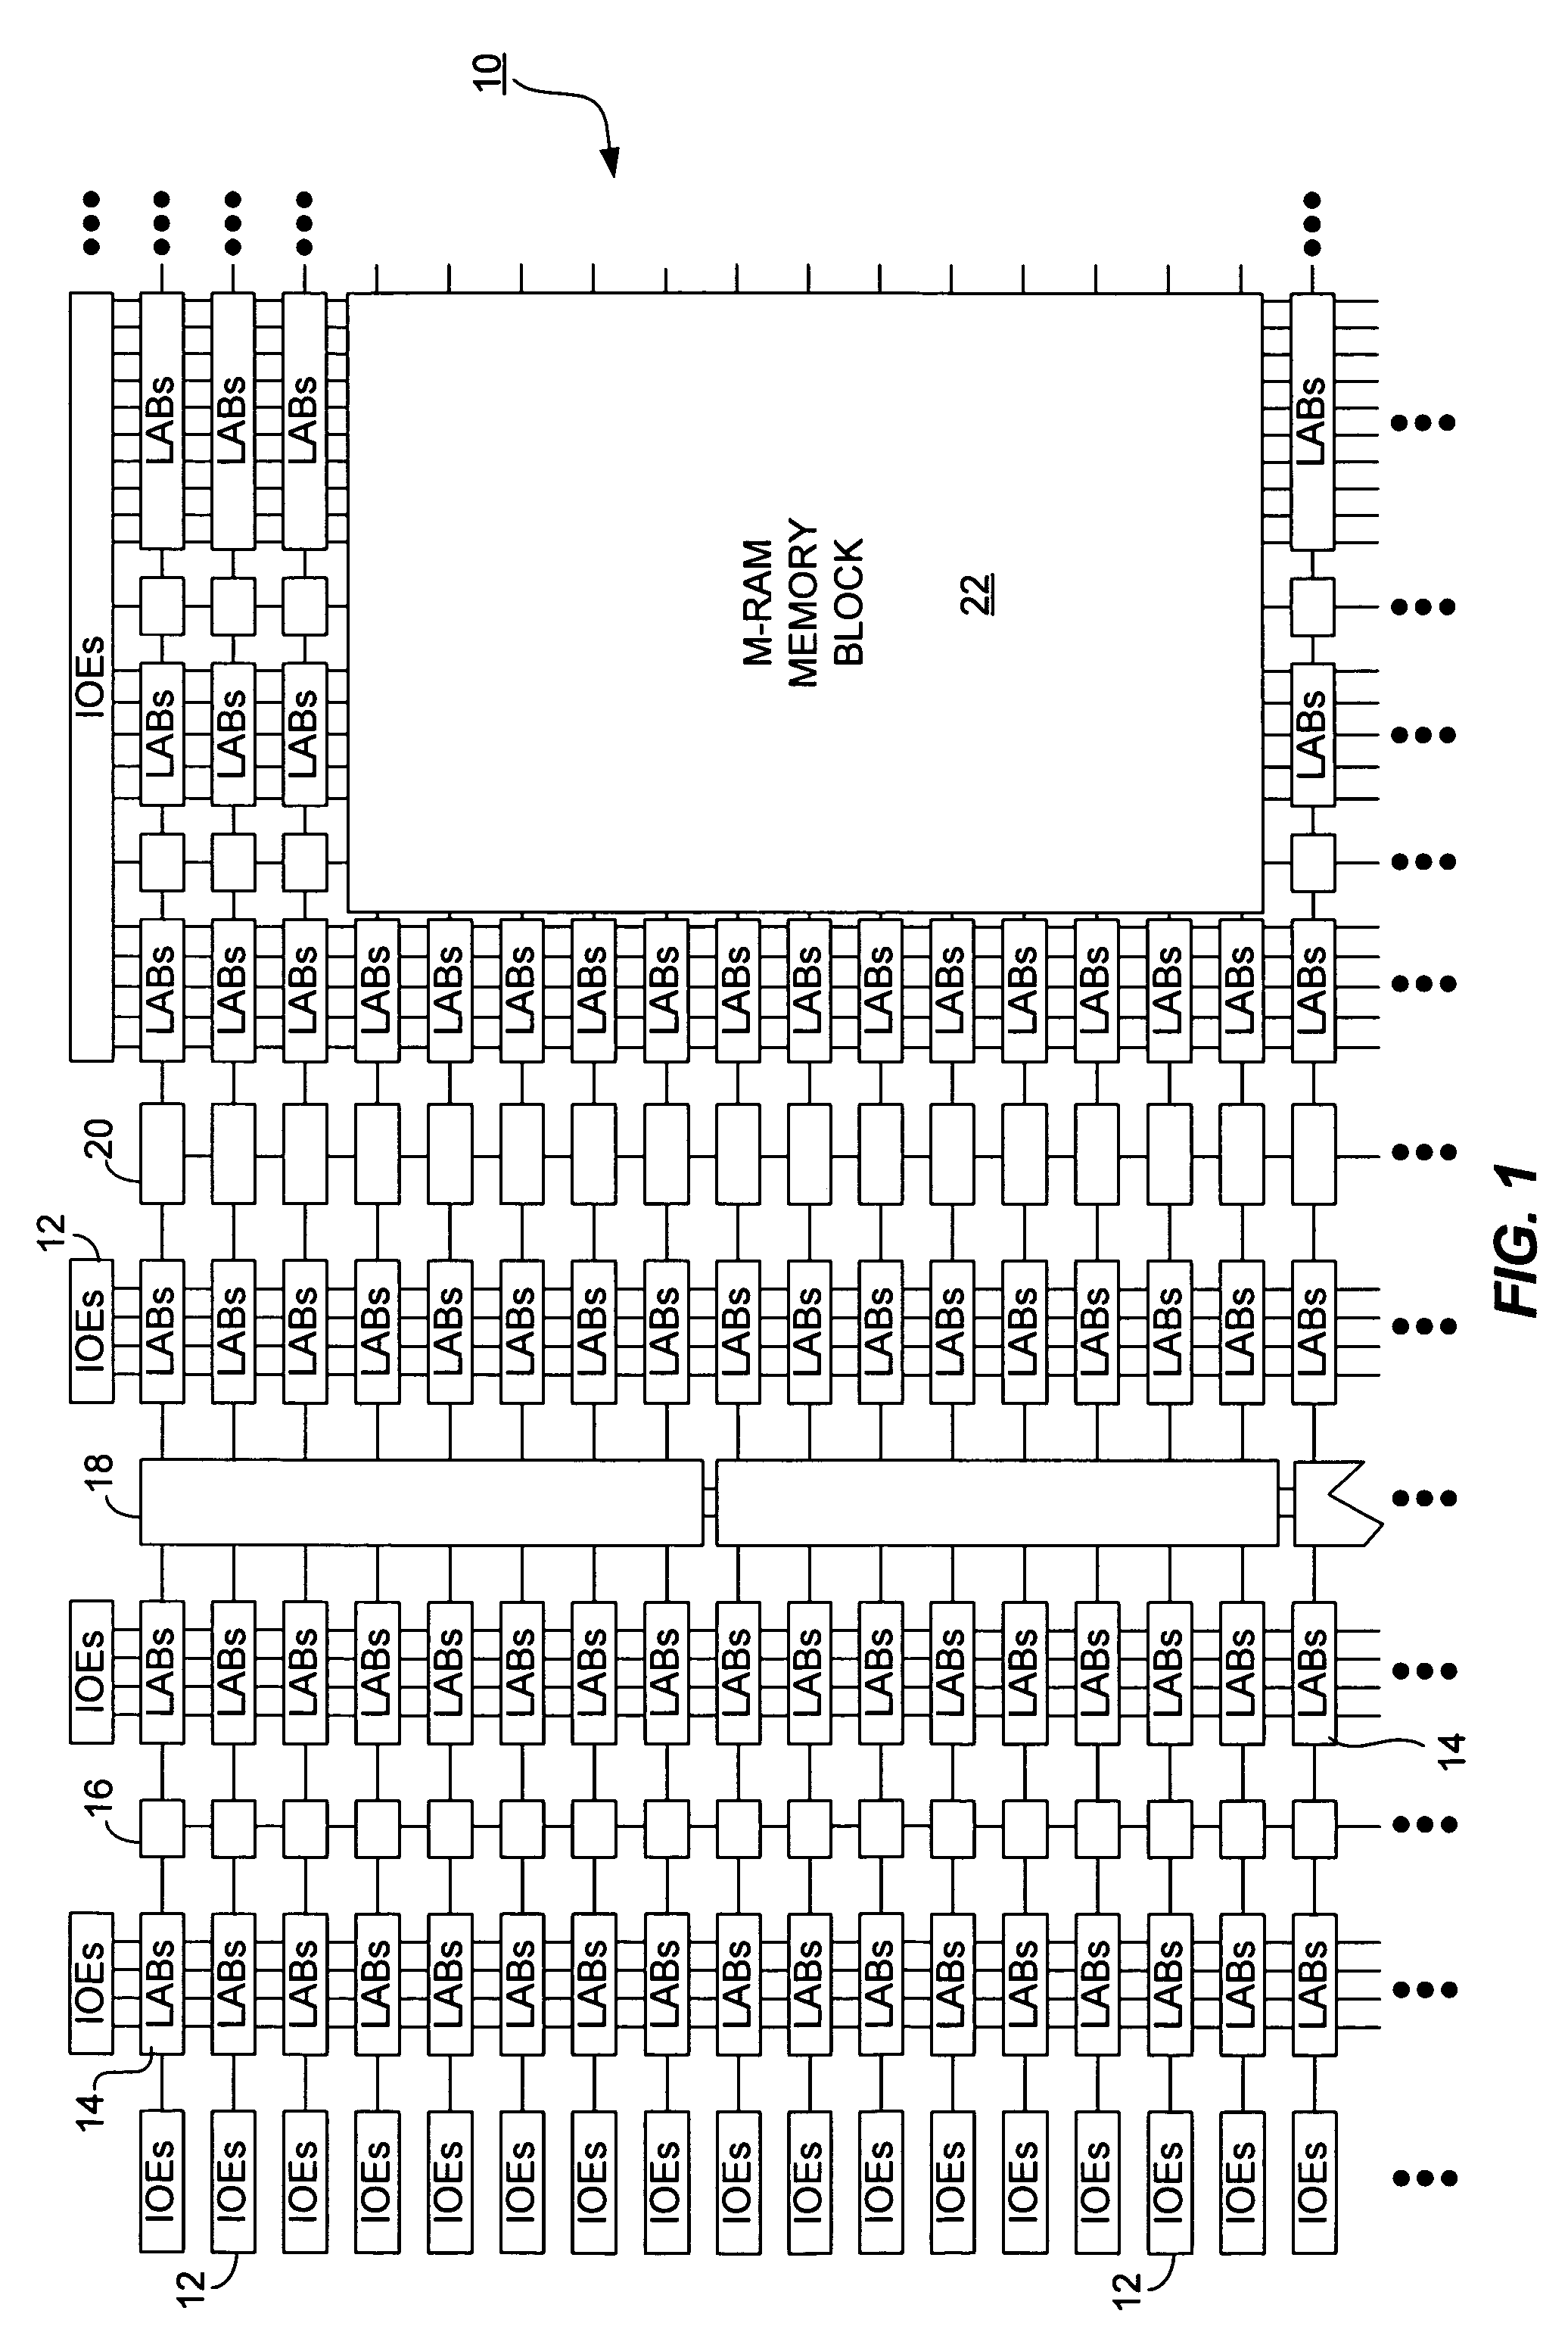 Apparatus and method for the arithmetic over-ride of look up table outputs in a programmable logic device